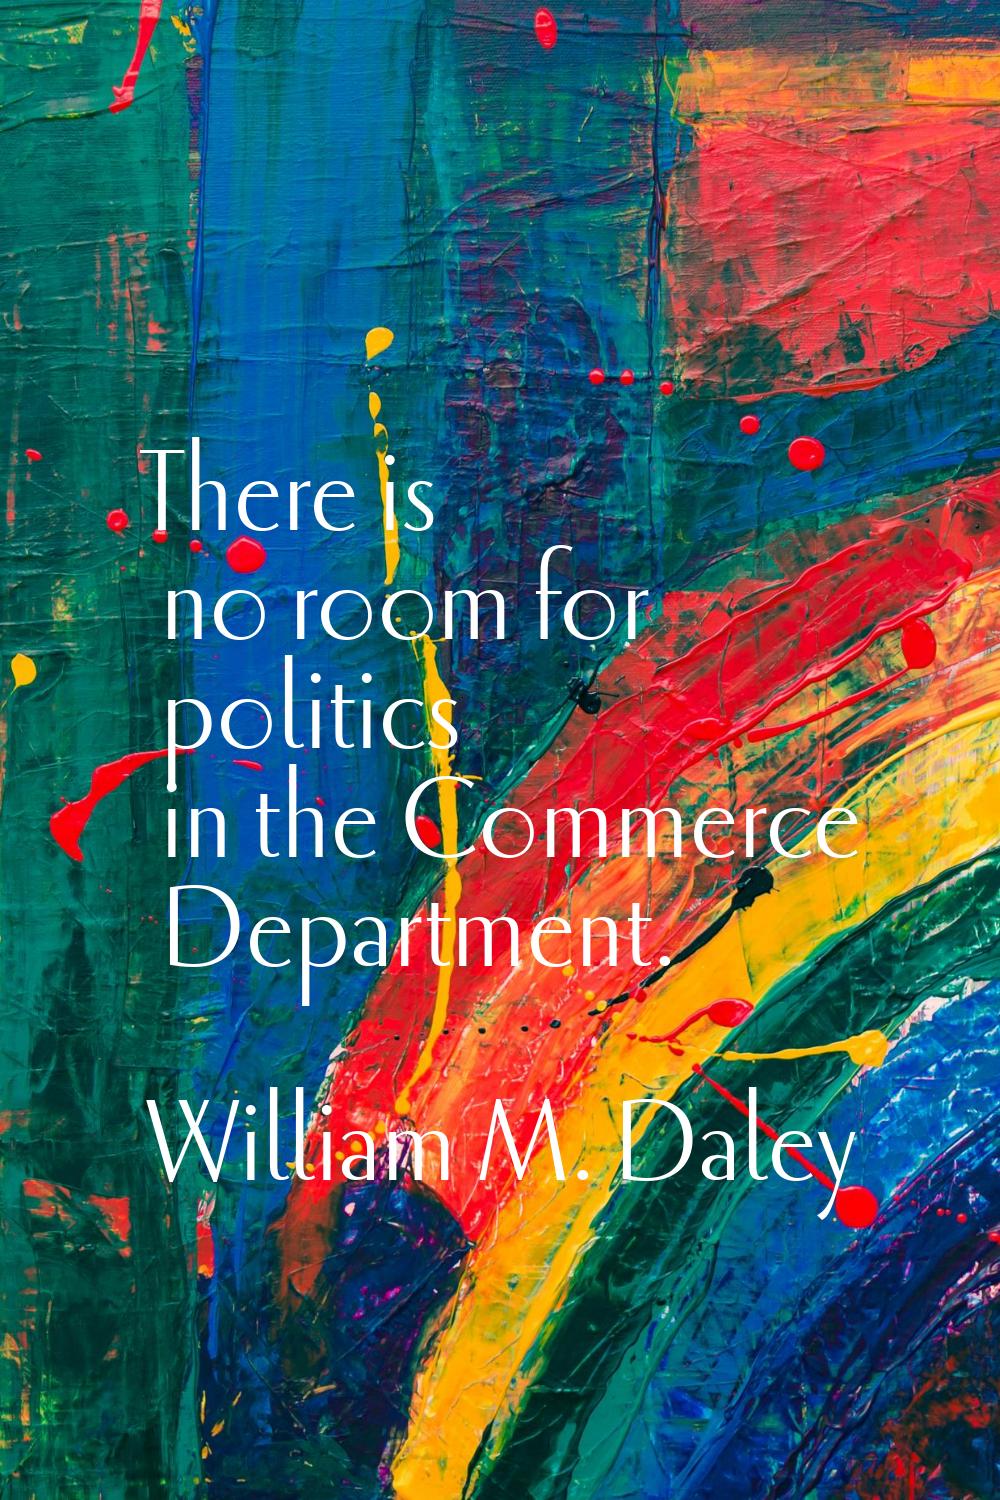 There is no room for politics in the Commerce Department.